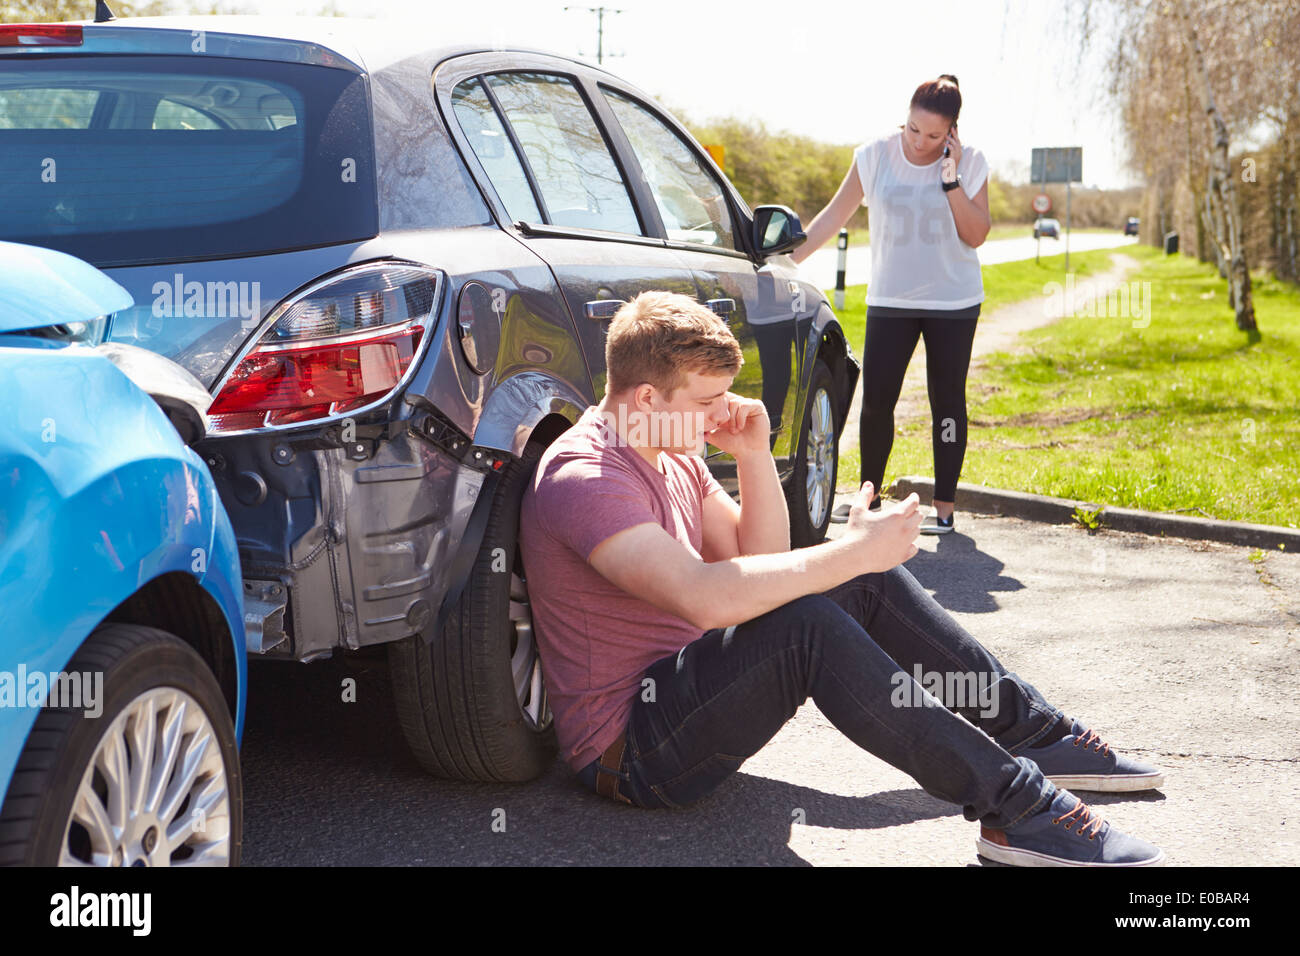 Two Cars Involved In Traffic Accident Stock Photo